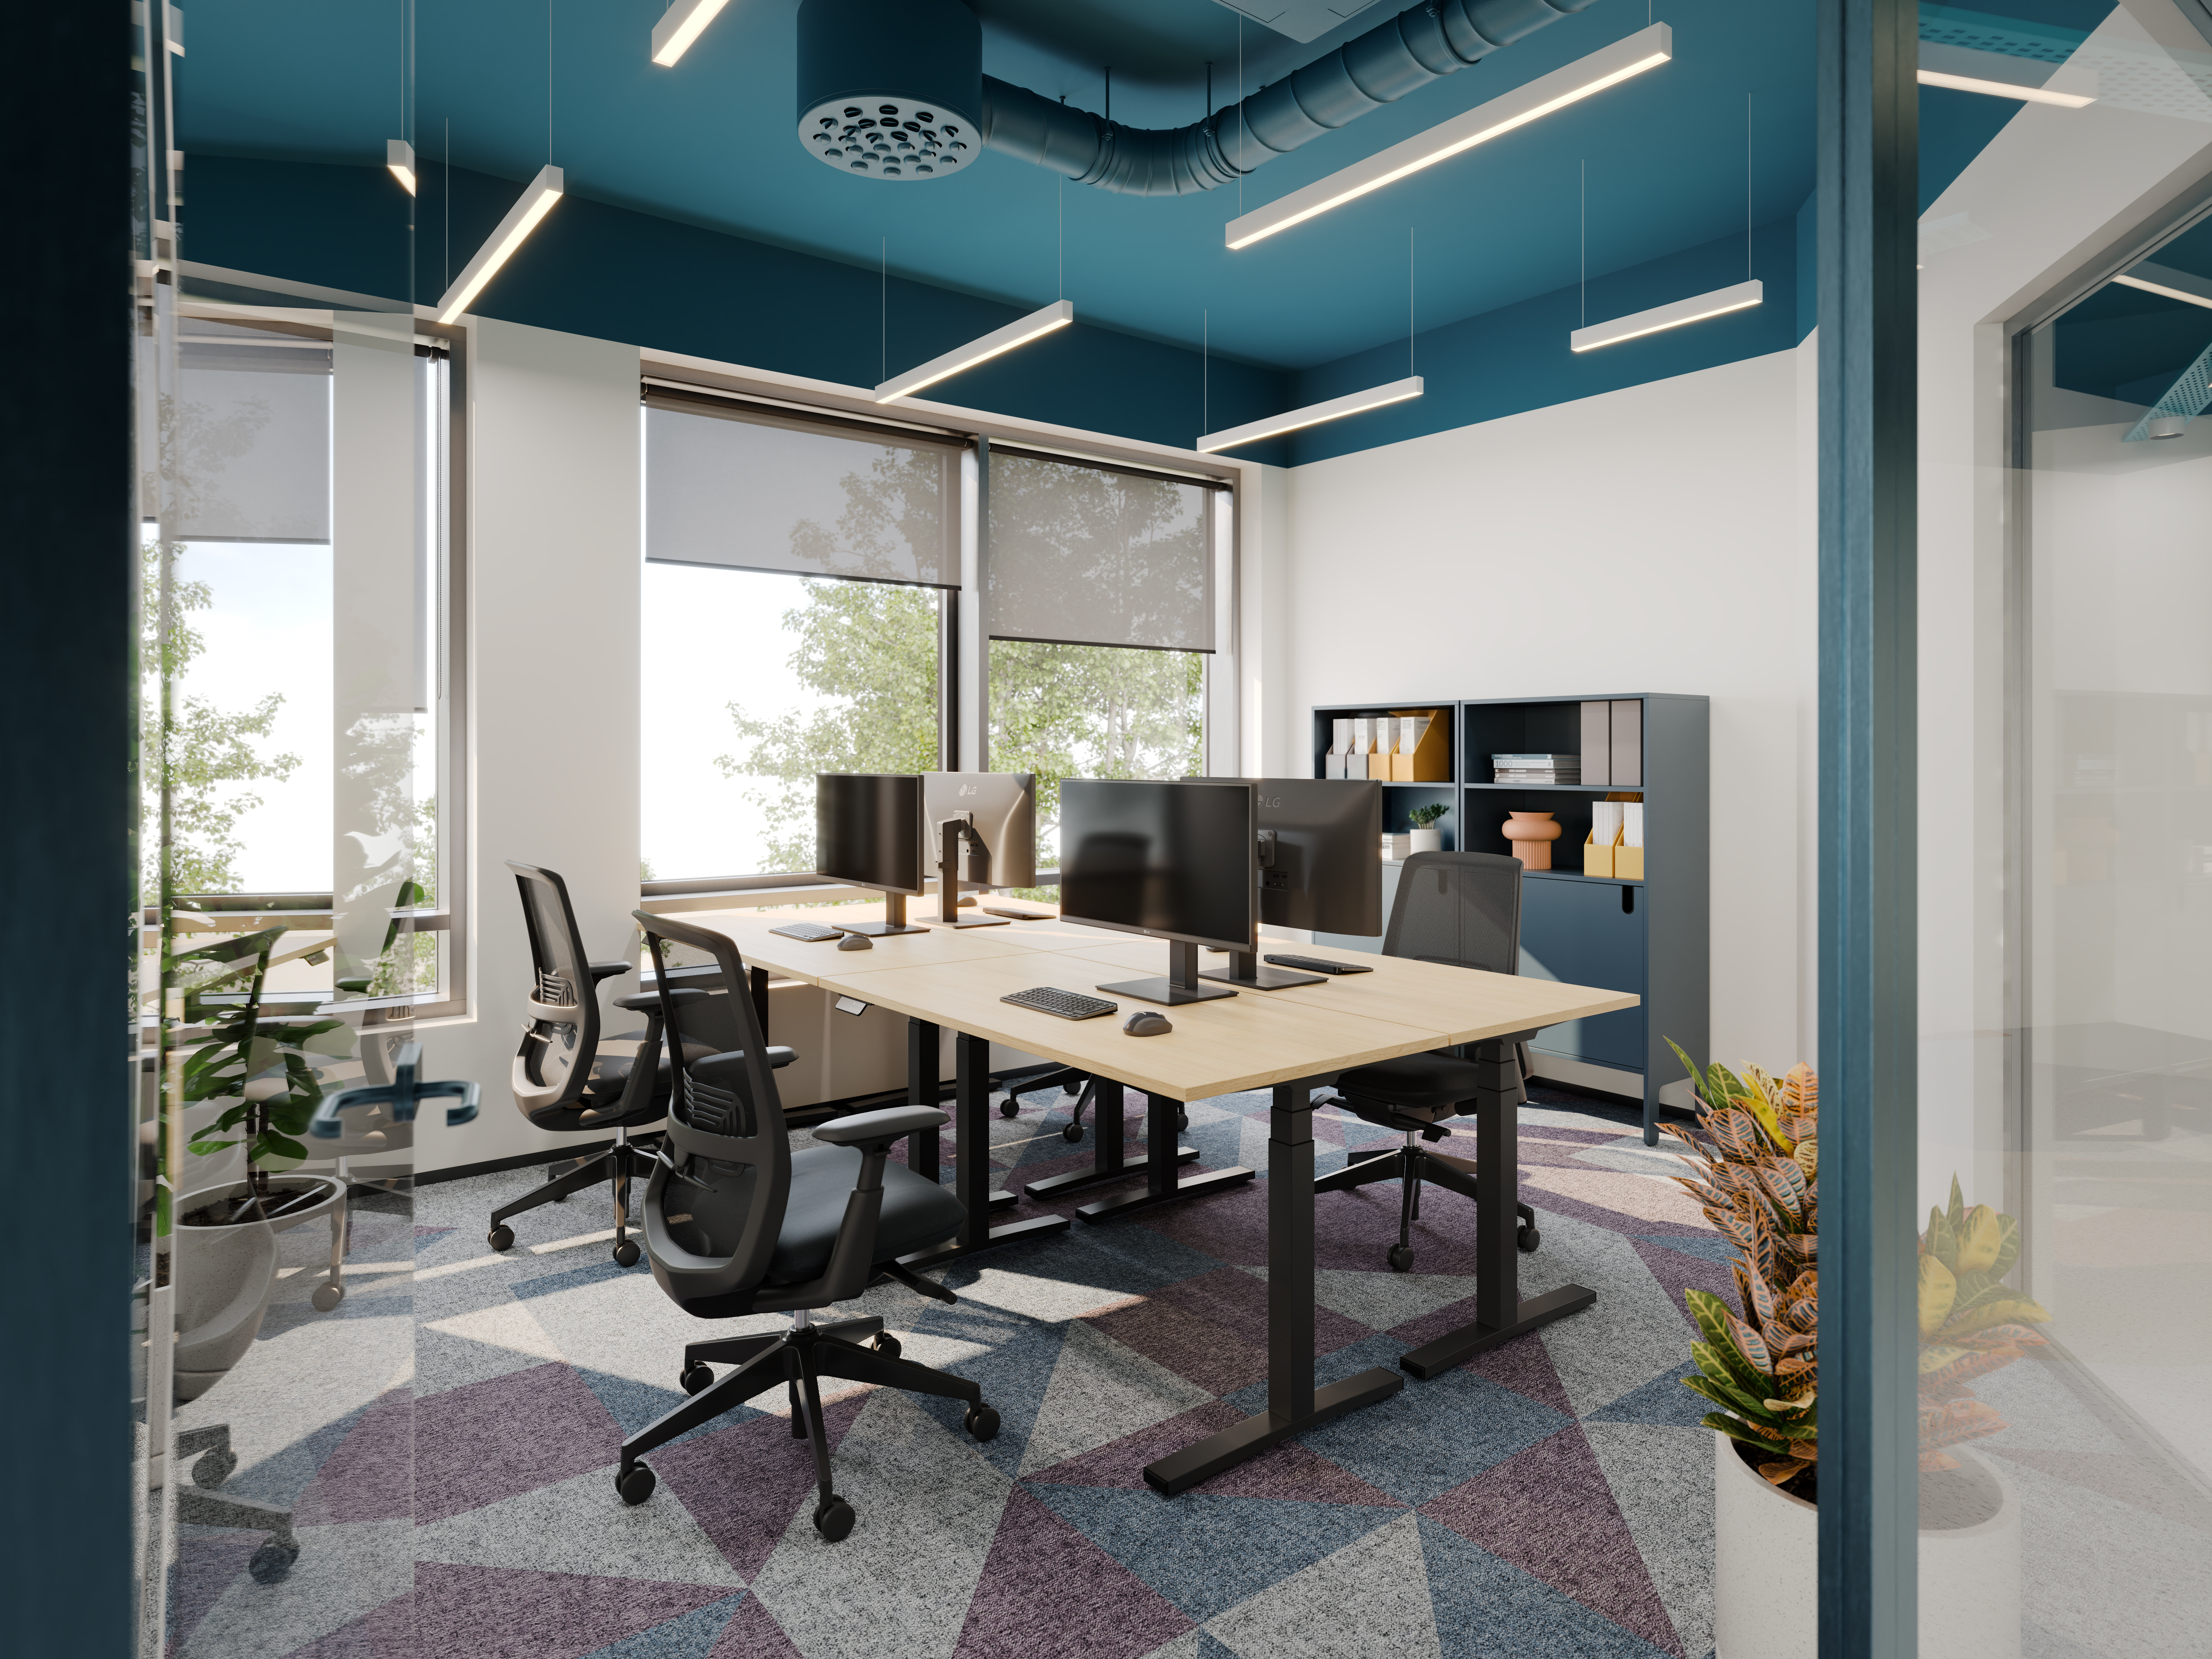 A private office at Workland Vektor – 3D visual.